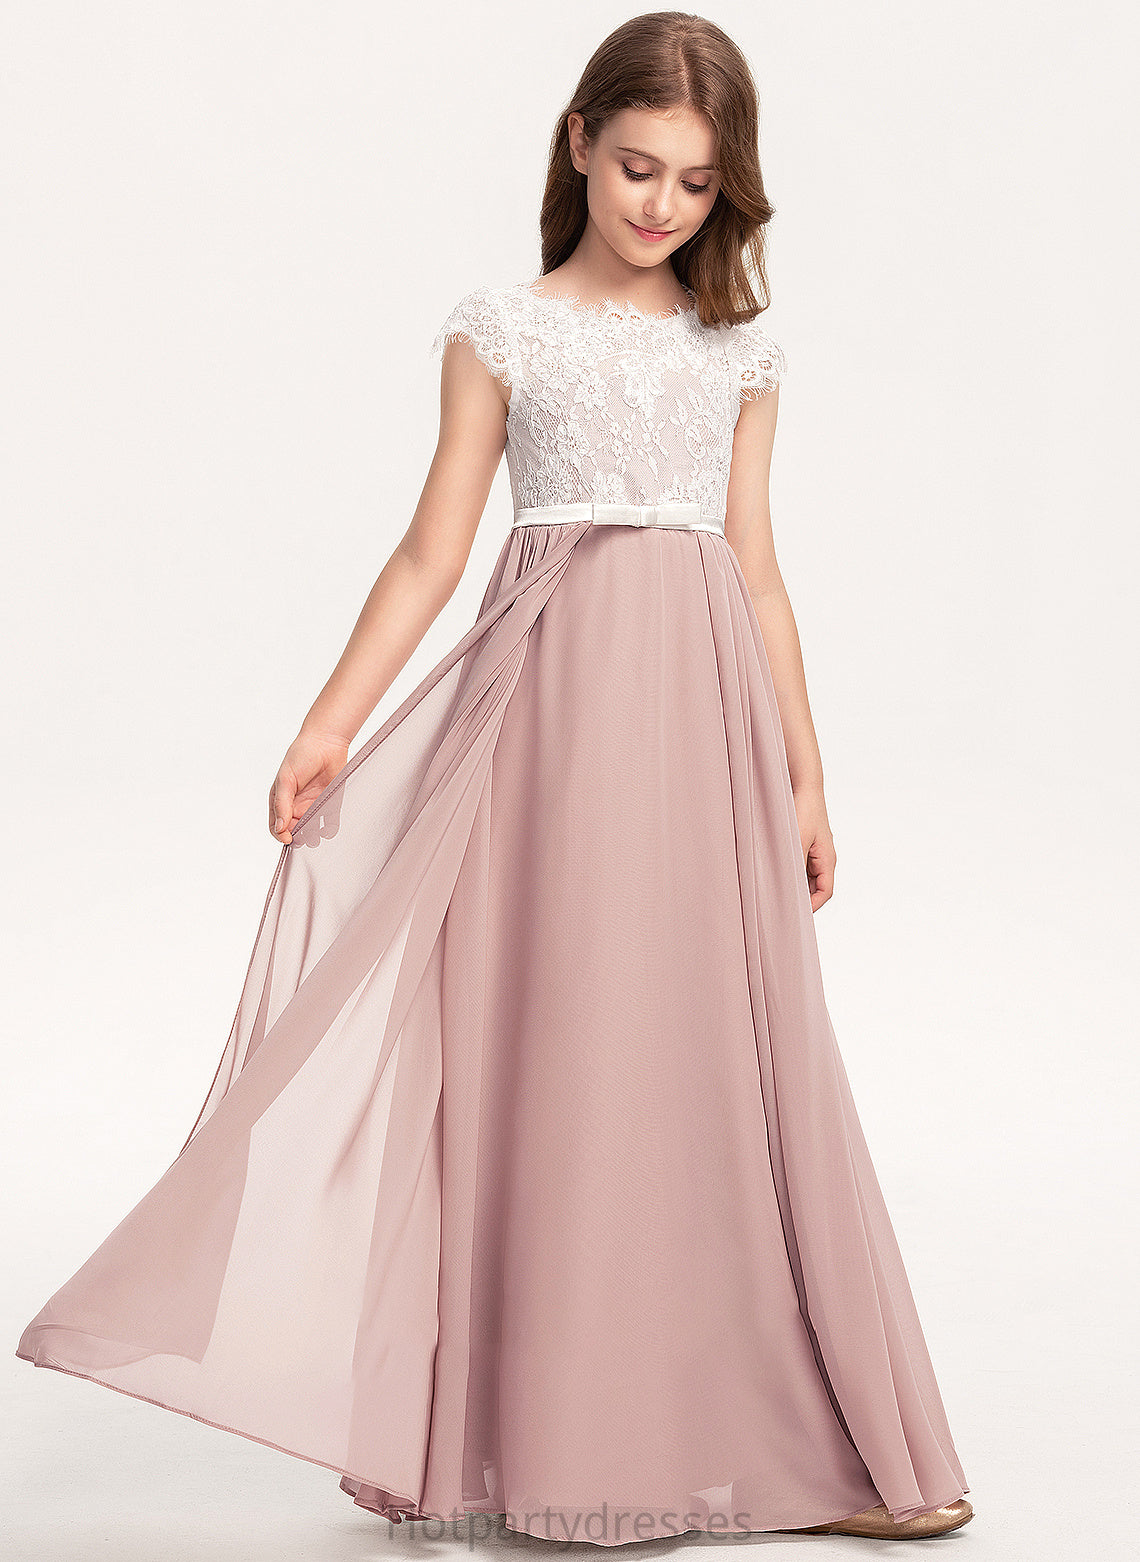 Lace Neck A-Line Bow(s) Chiffon Junior Bridesmaid Dresses Gabrielle Floor-Length Scoop With